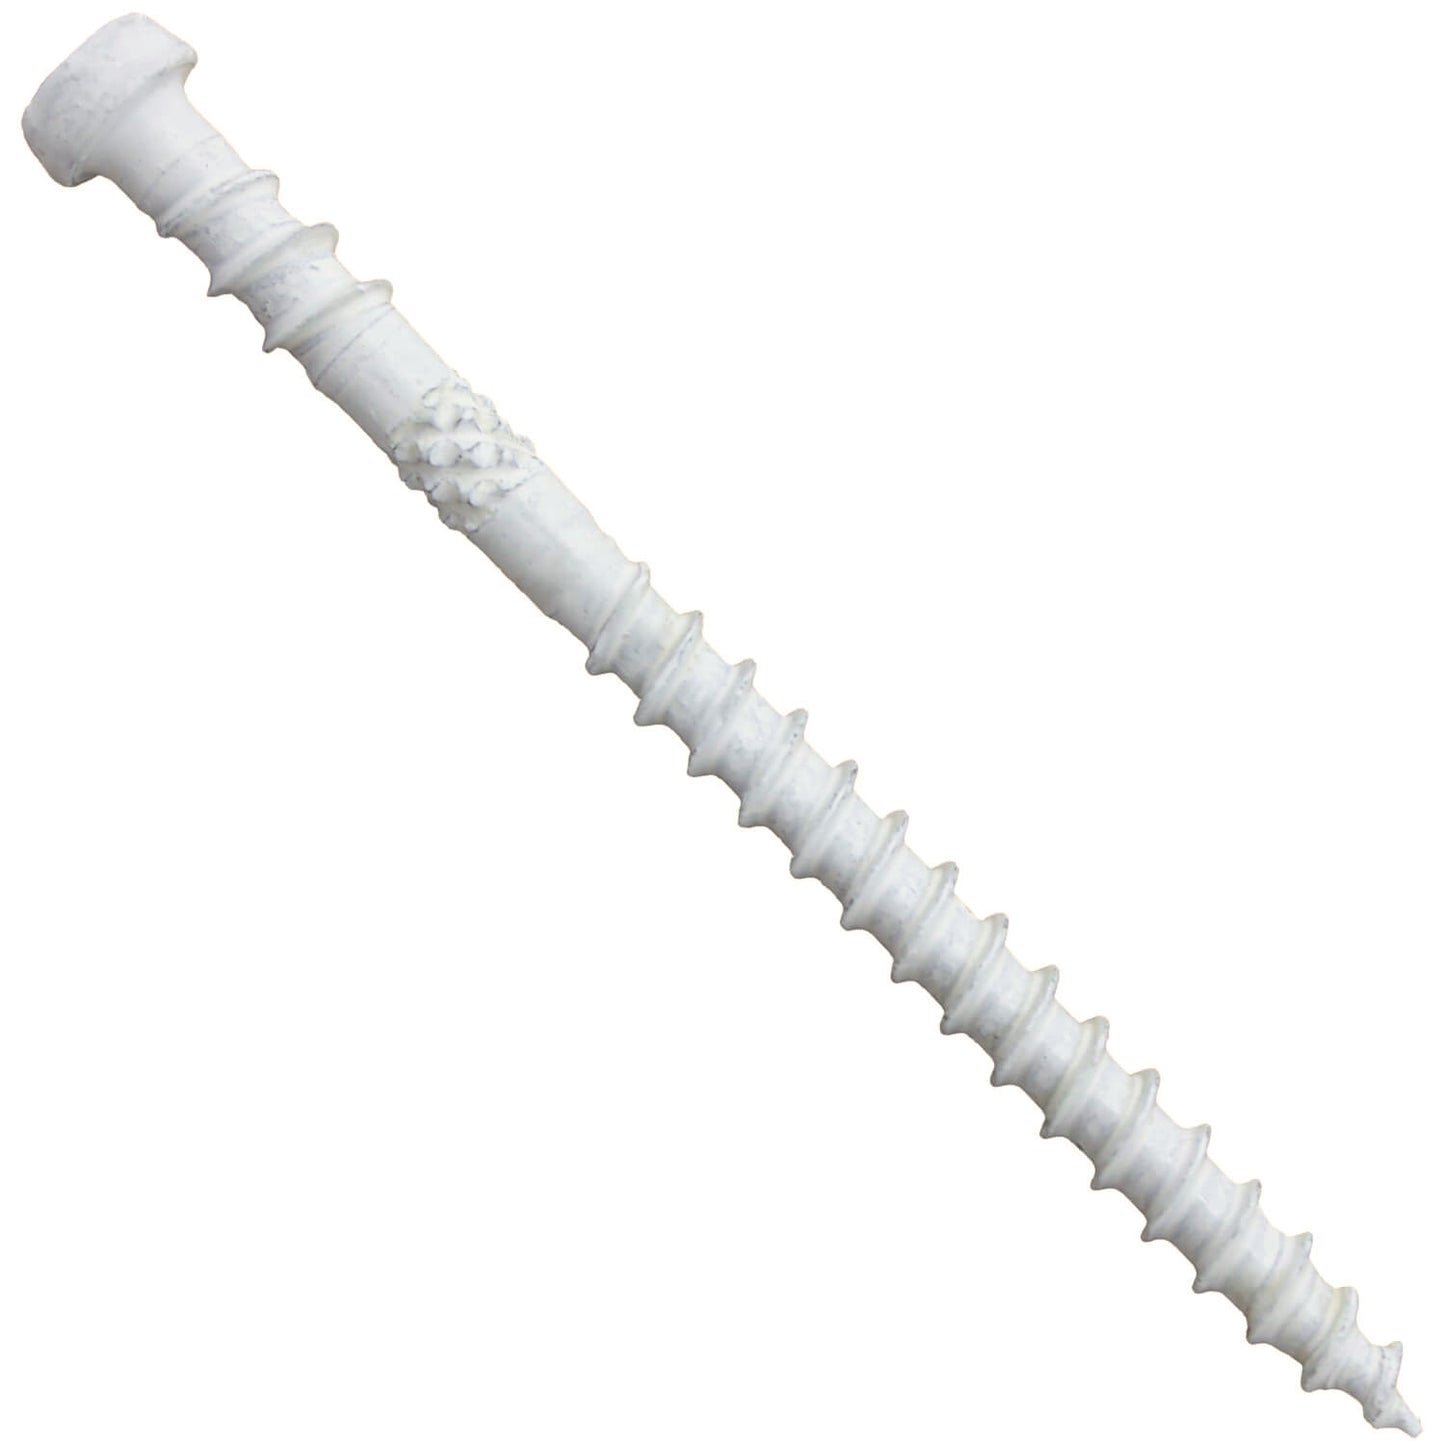 Jake Sales #10 x 2-3/4" WHITE Colored Composite Decking Wood Screw with Torx/Star Drive Head - Exterior Coated - ACQ Lumber Compatible 5 POUNDS ~350 Screws